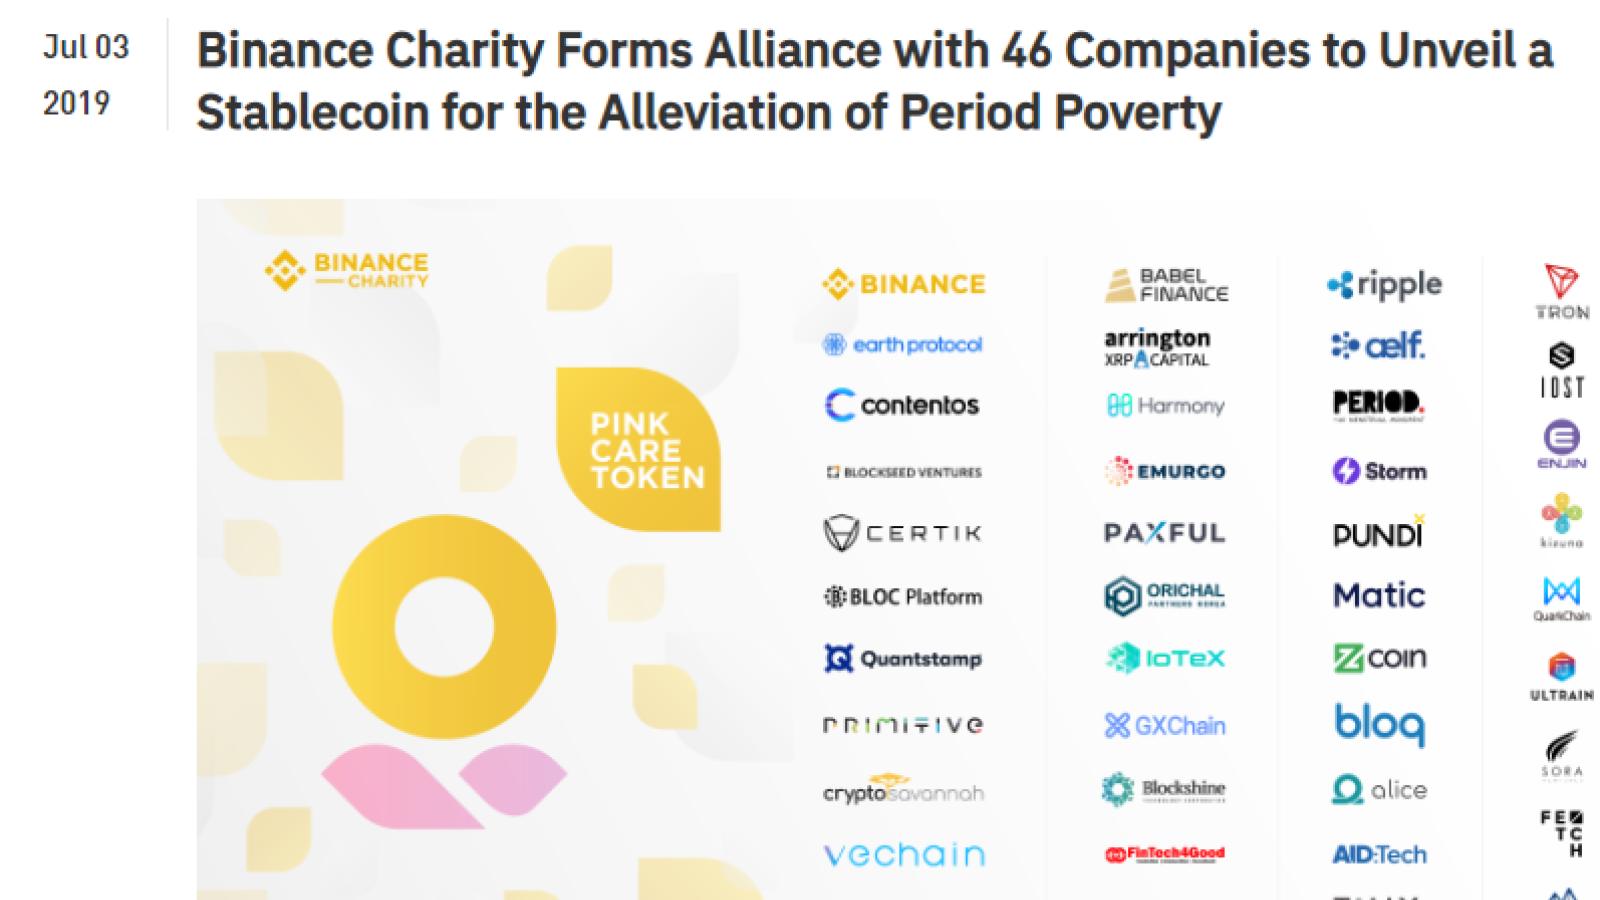 https://www.binance.com/en/blog/353125312788316160/Binance-Charity-Forms-Alliance-with-46-Companies-to-Unveil-a-Stablecoin-for-the-Alleviation-of-Period-Poverty 